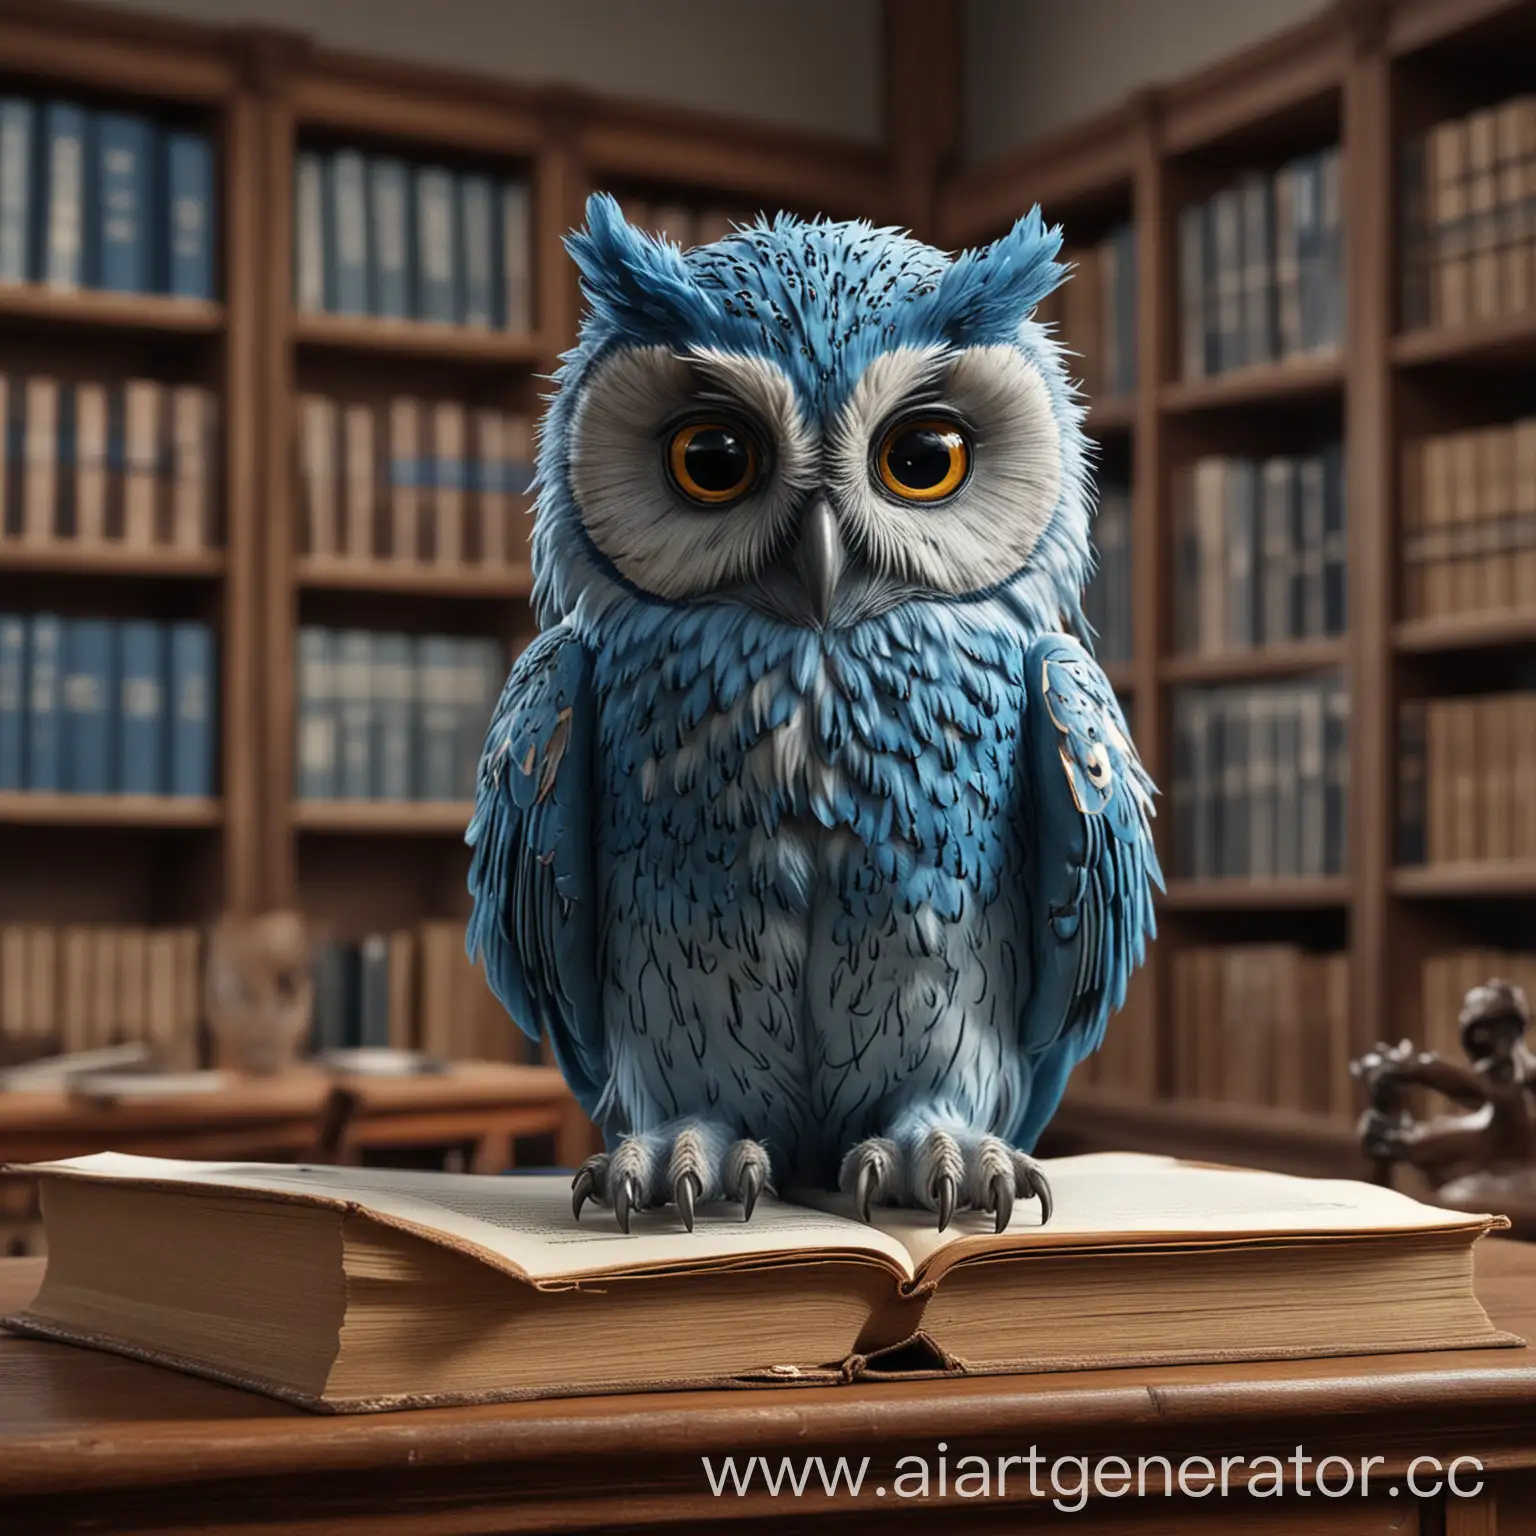 Sweet-Owl-Mascot-for-Universitaet-des-Saarlandes-Blue-Owl-in-the-Library